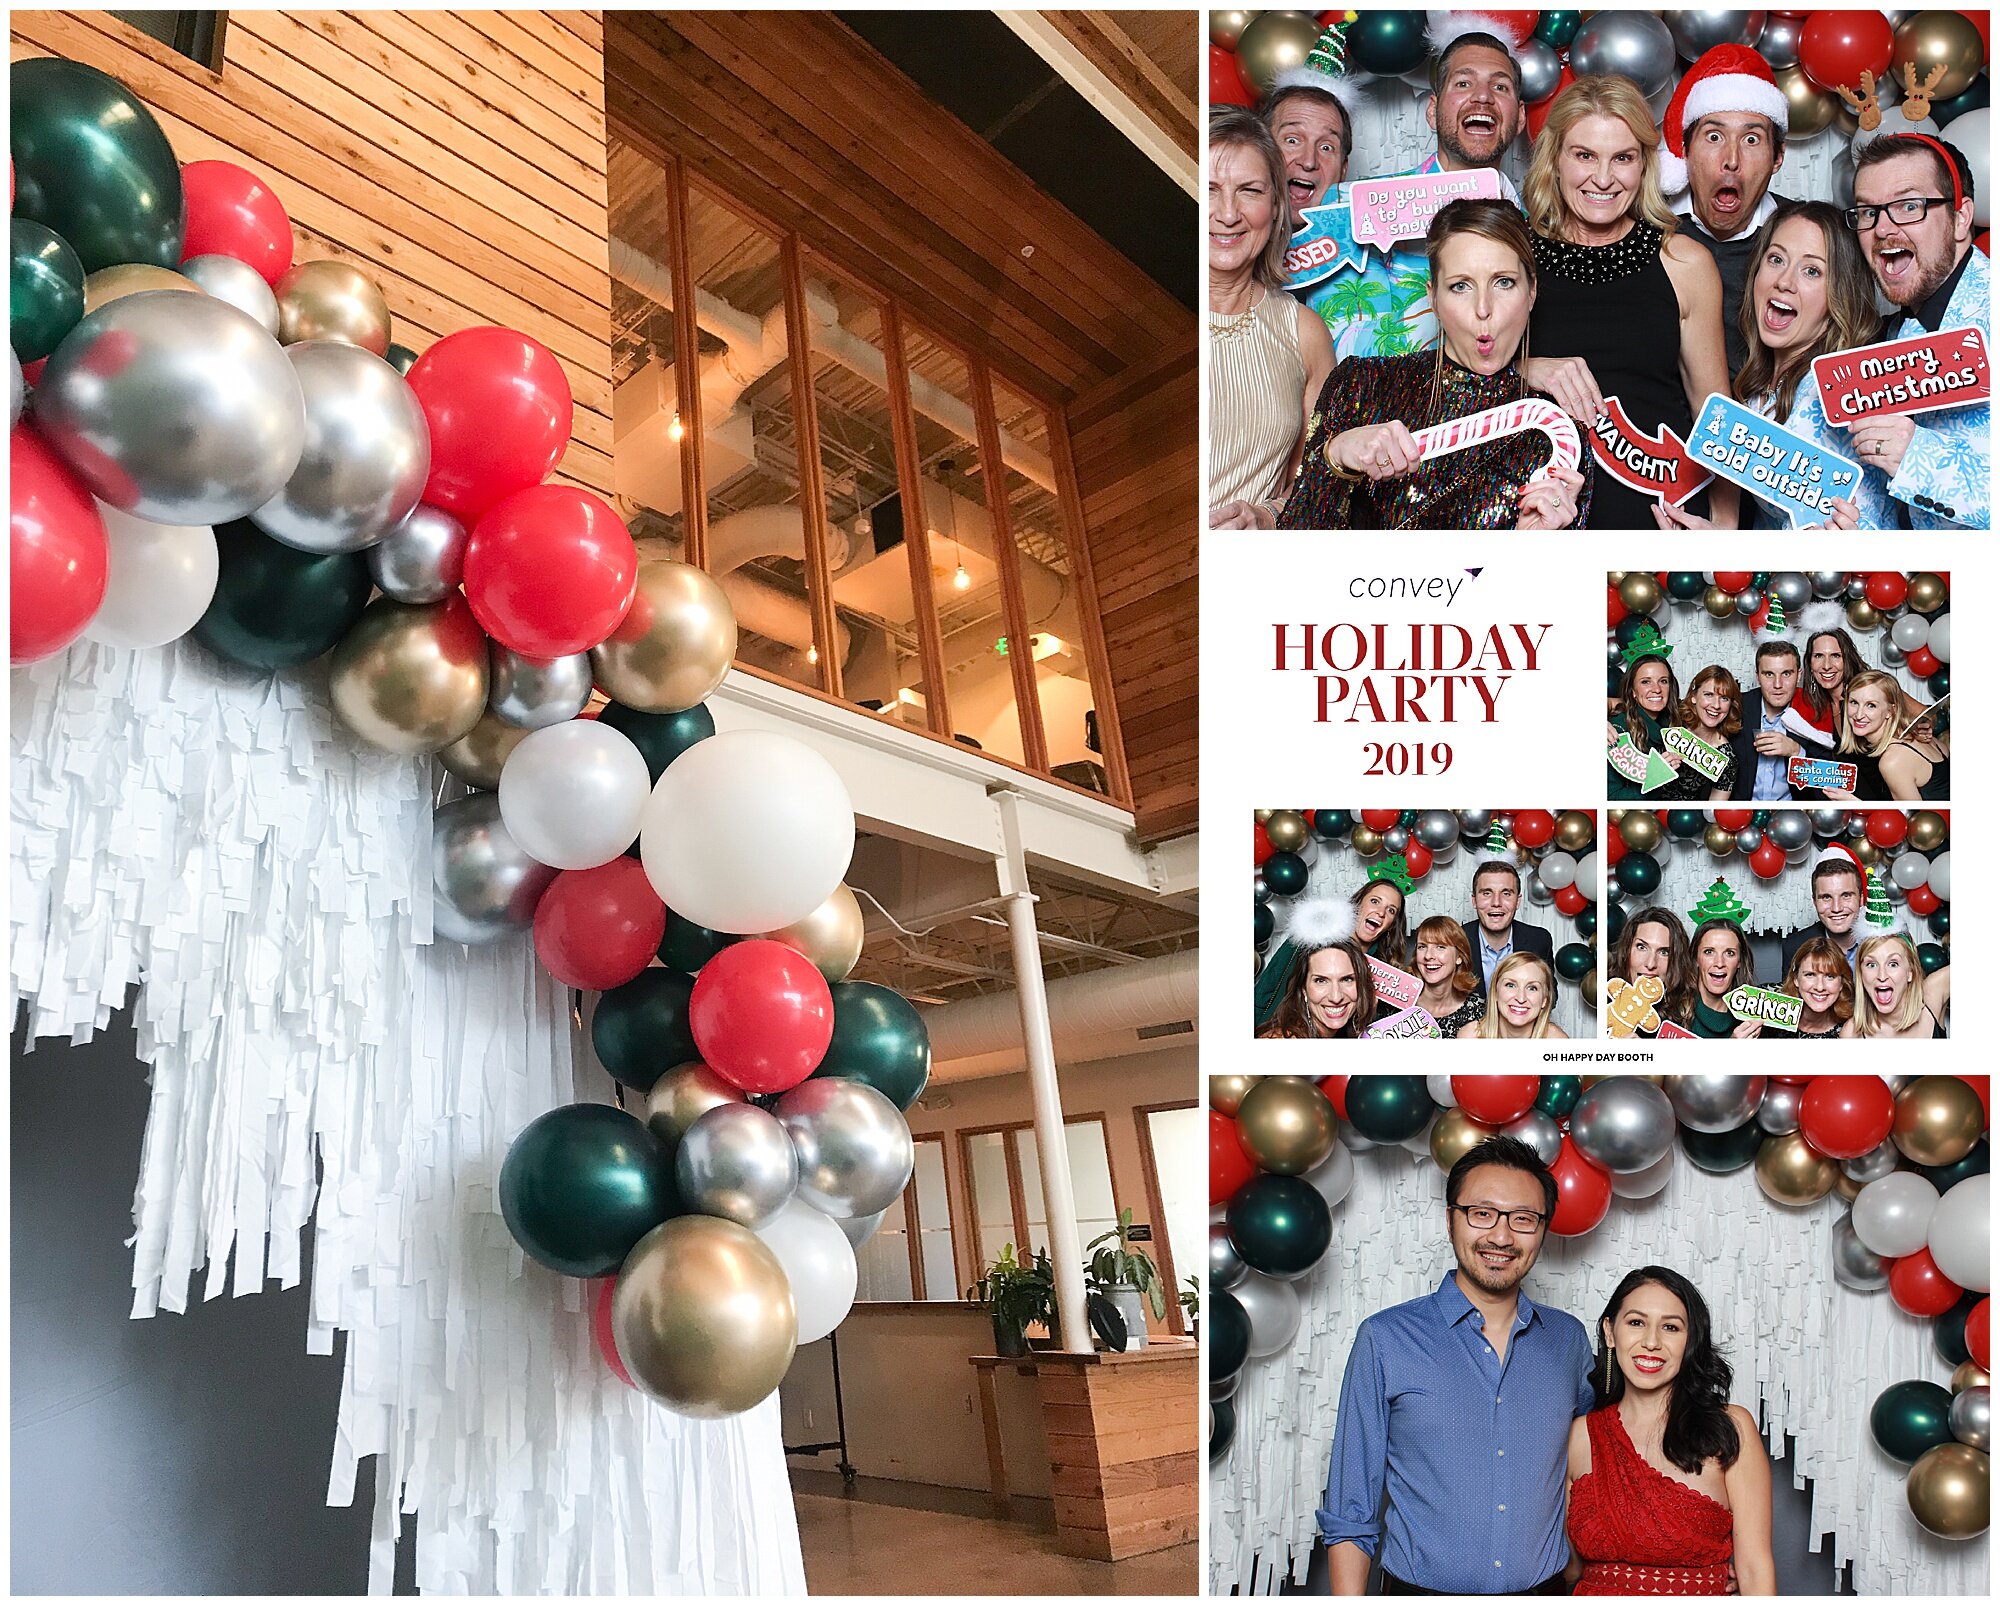 Plan a Winter Wonderland Party, Party Theme Ideas, Holiday Party